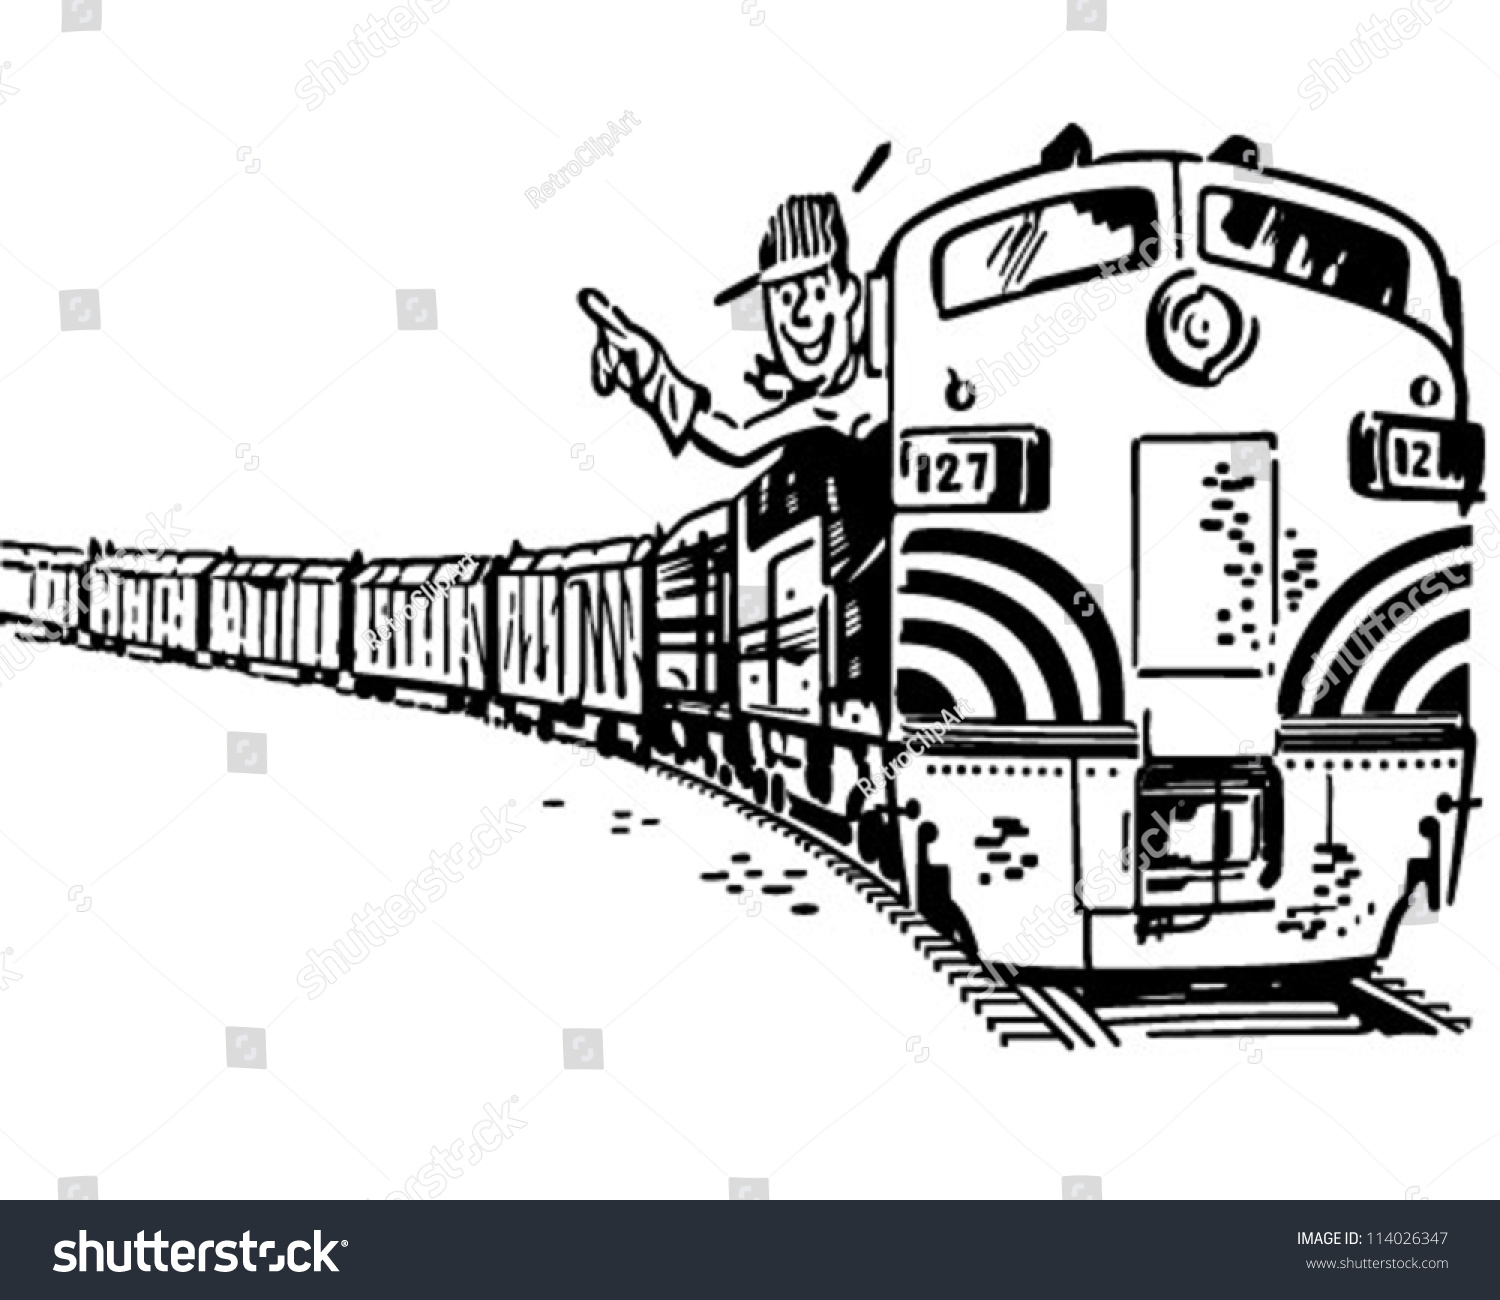 electric train clipart black and white - photo #36